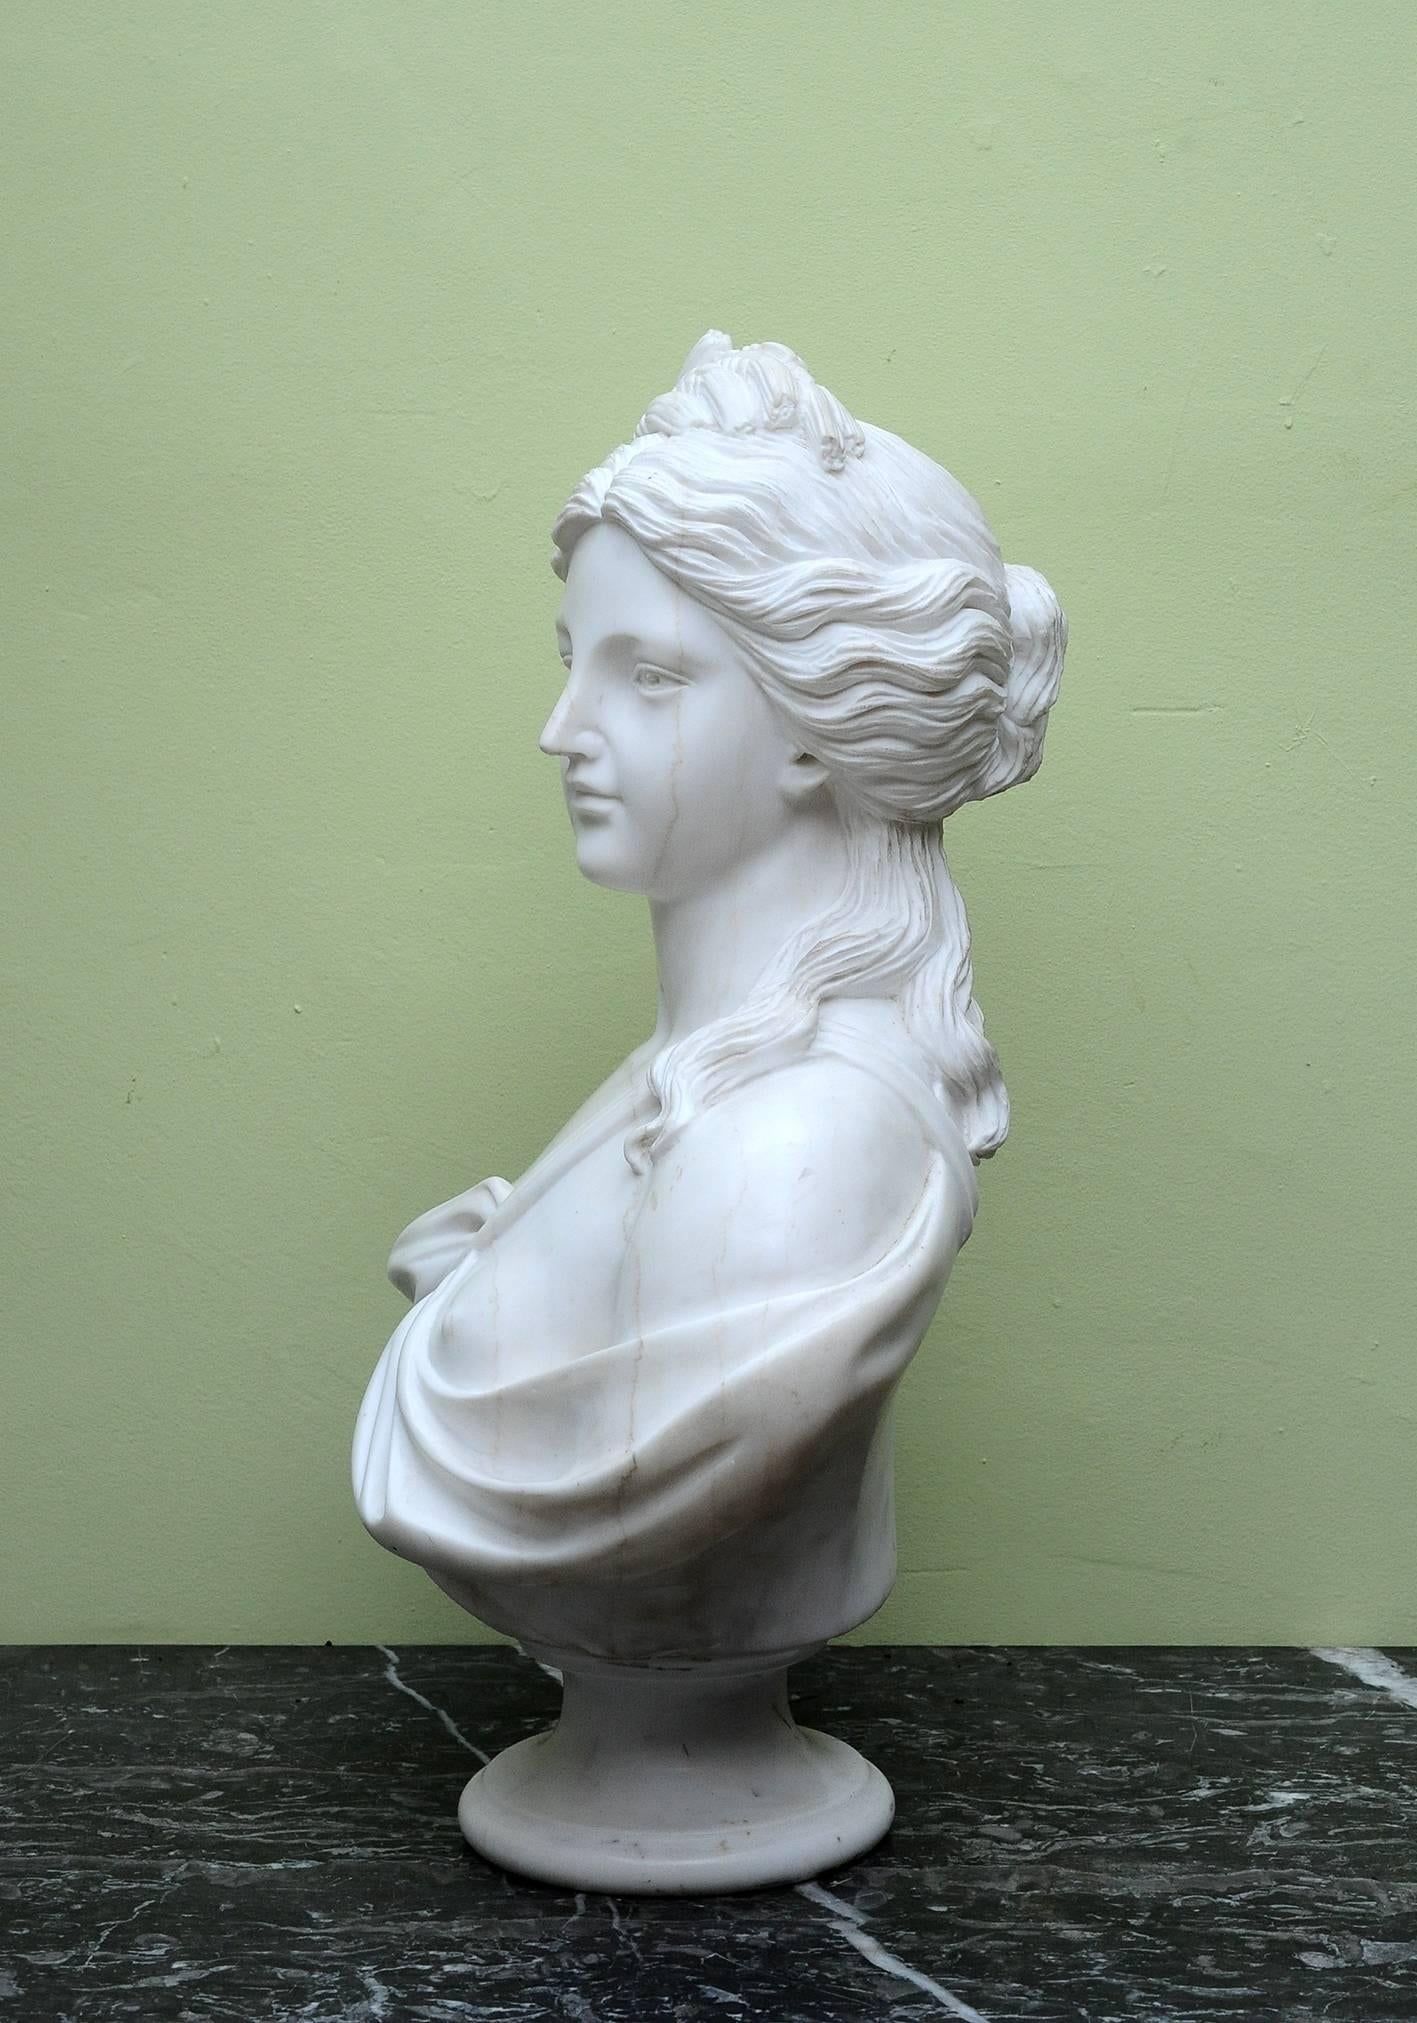 Impressive woman's bust.
White marble,
circa 1940.
Very nice facial features with a lost look absolutely striking. Sitting on a pied douche base.
   